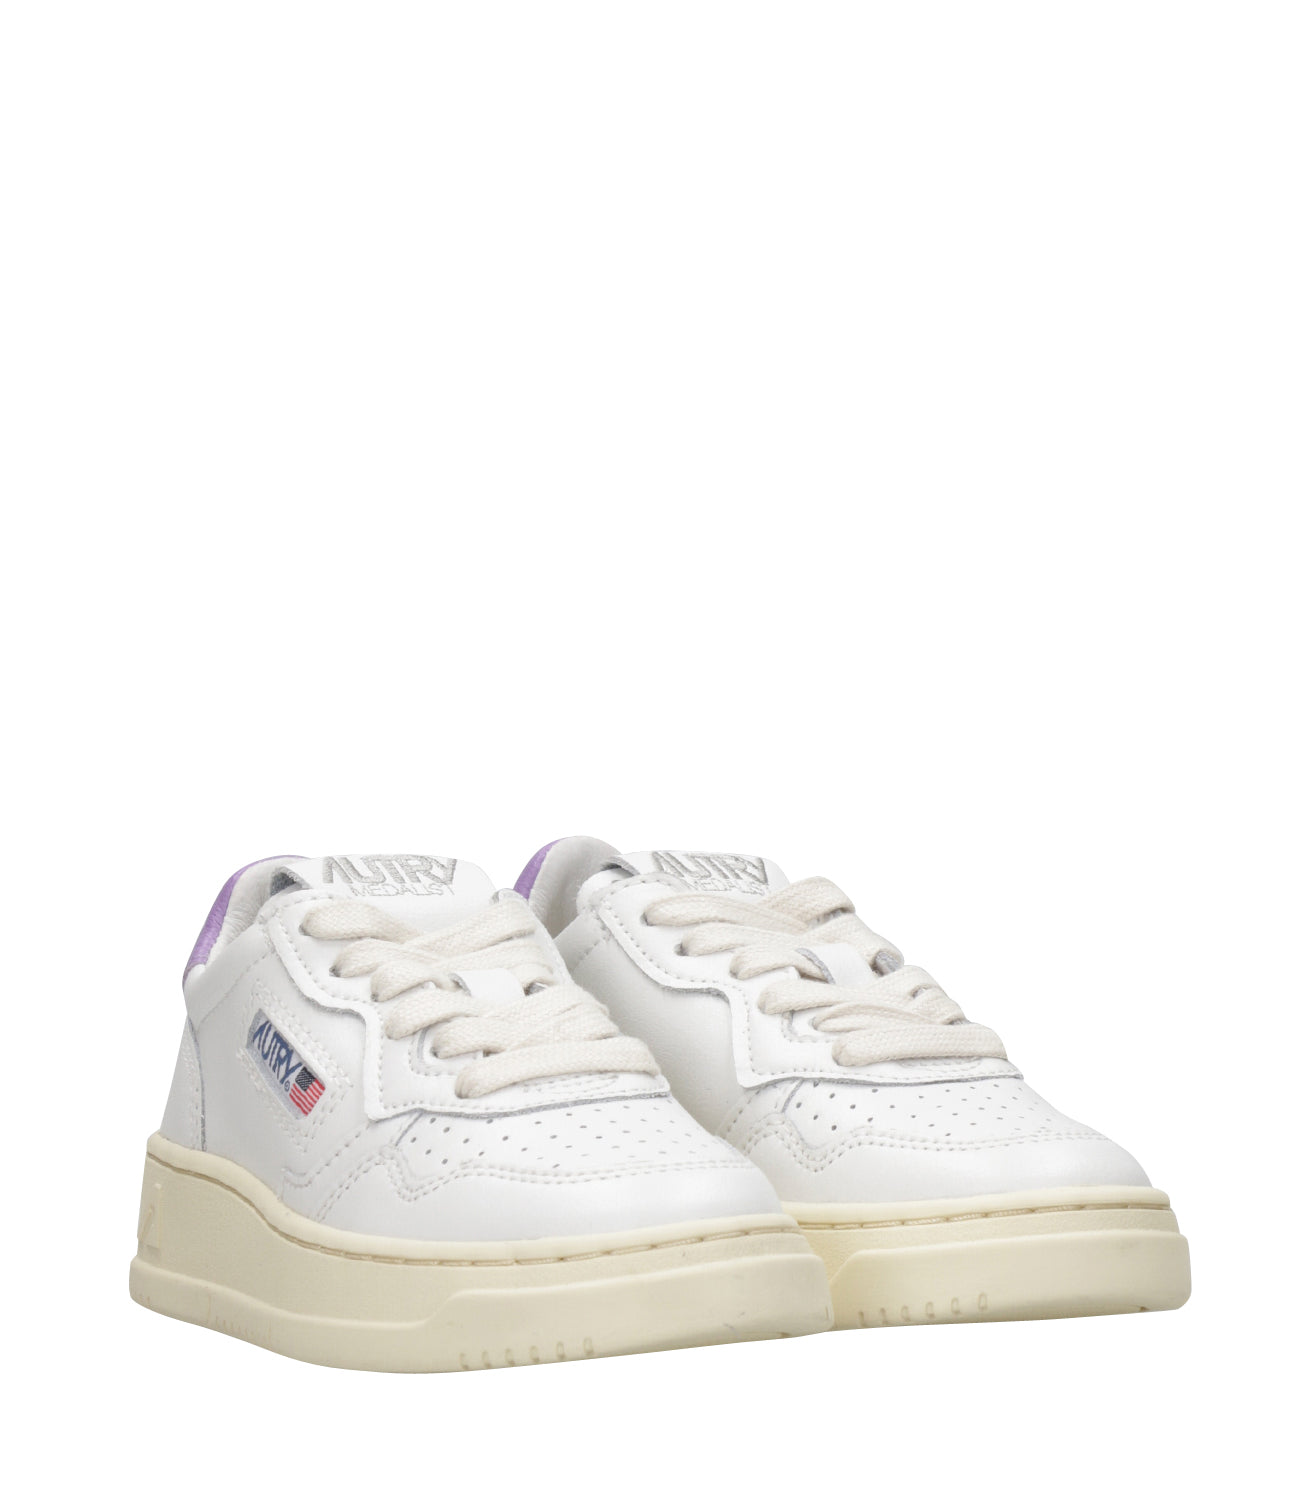 Autry Kids | Medalist Low Sneakers White and Wisteria